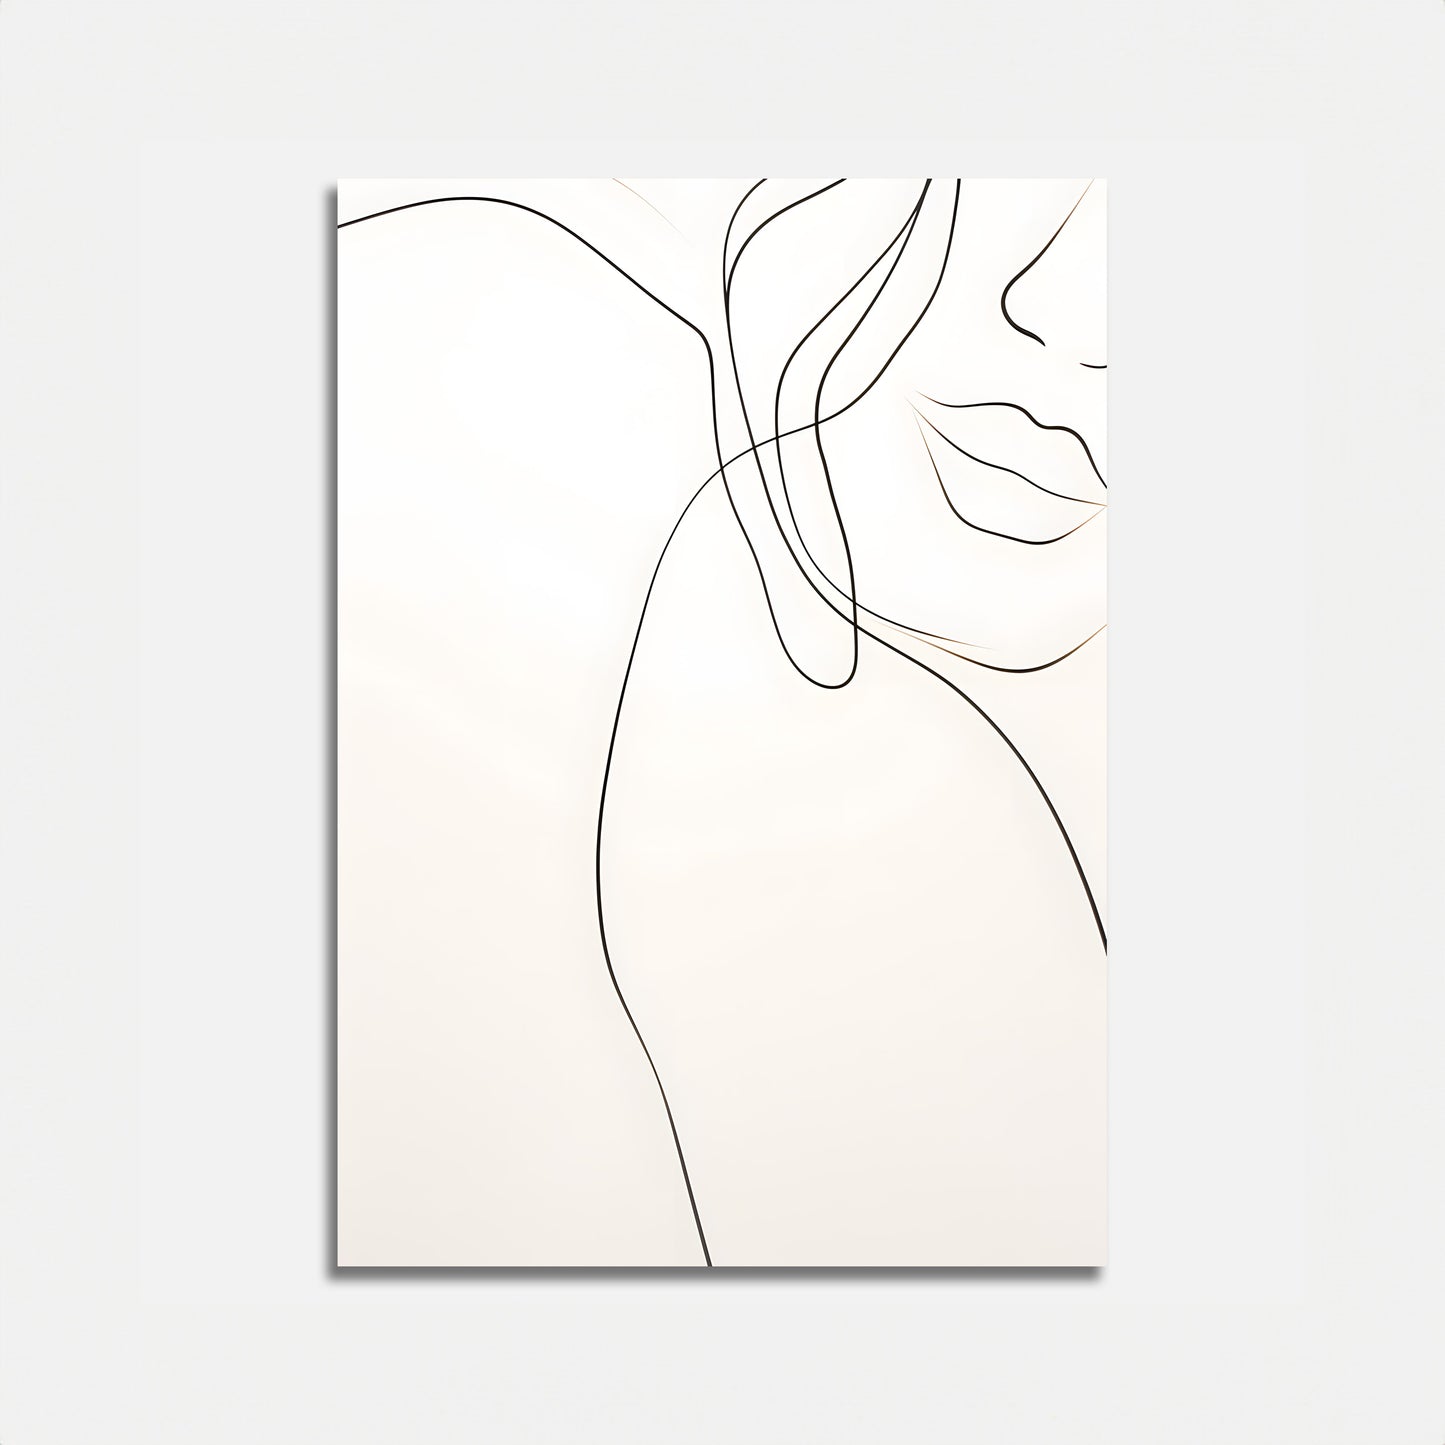 Minimalist line art of a woman's face on a canvas.